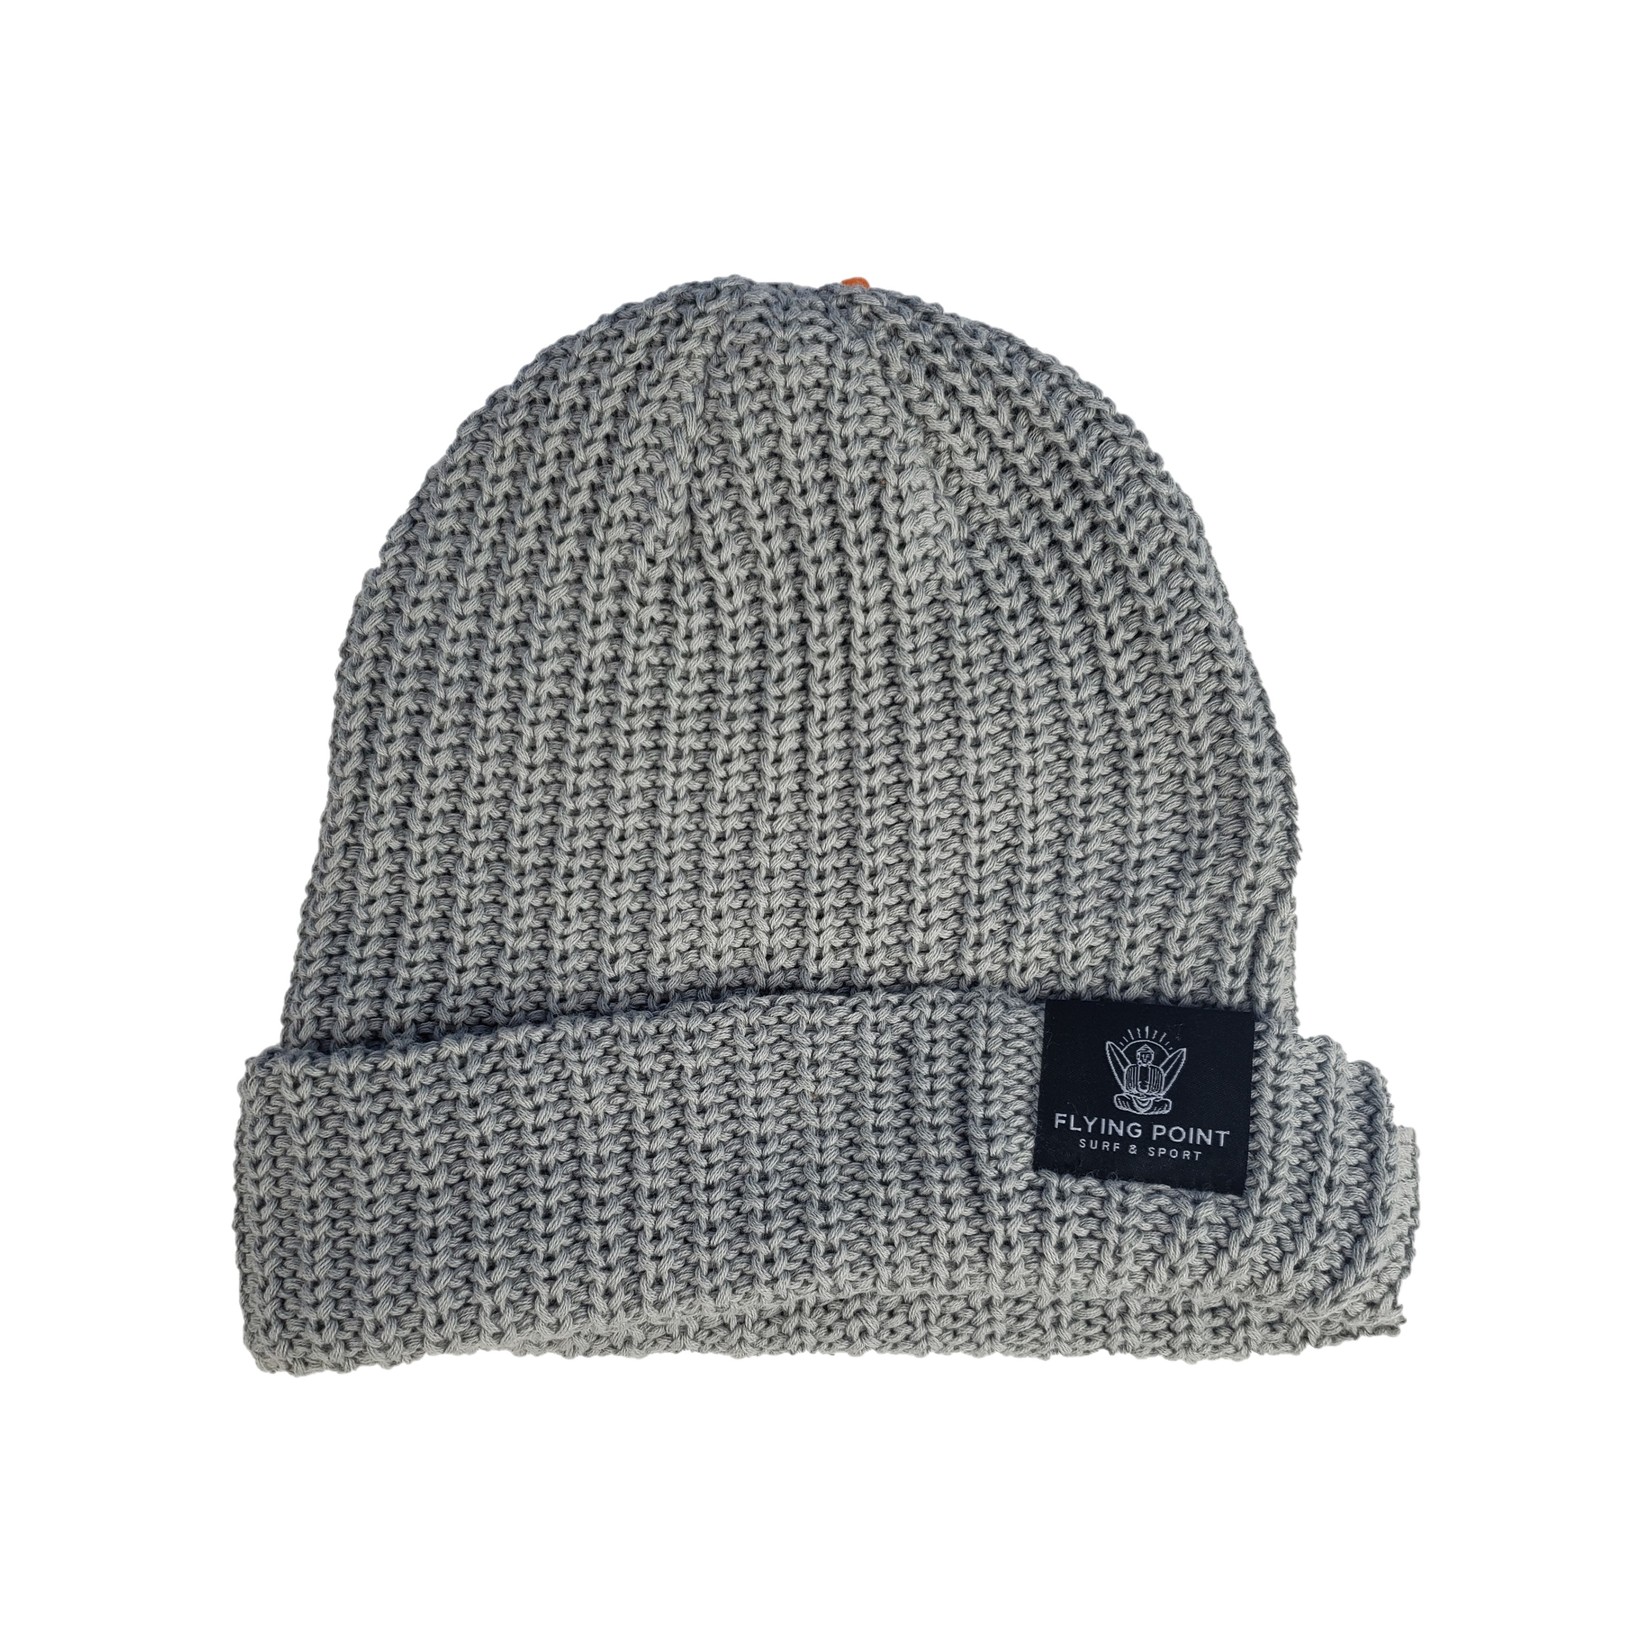 Flying Point Knit Beanie